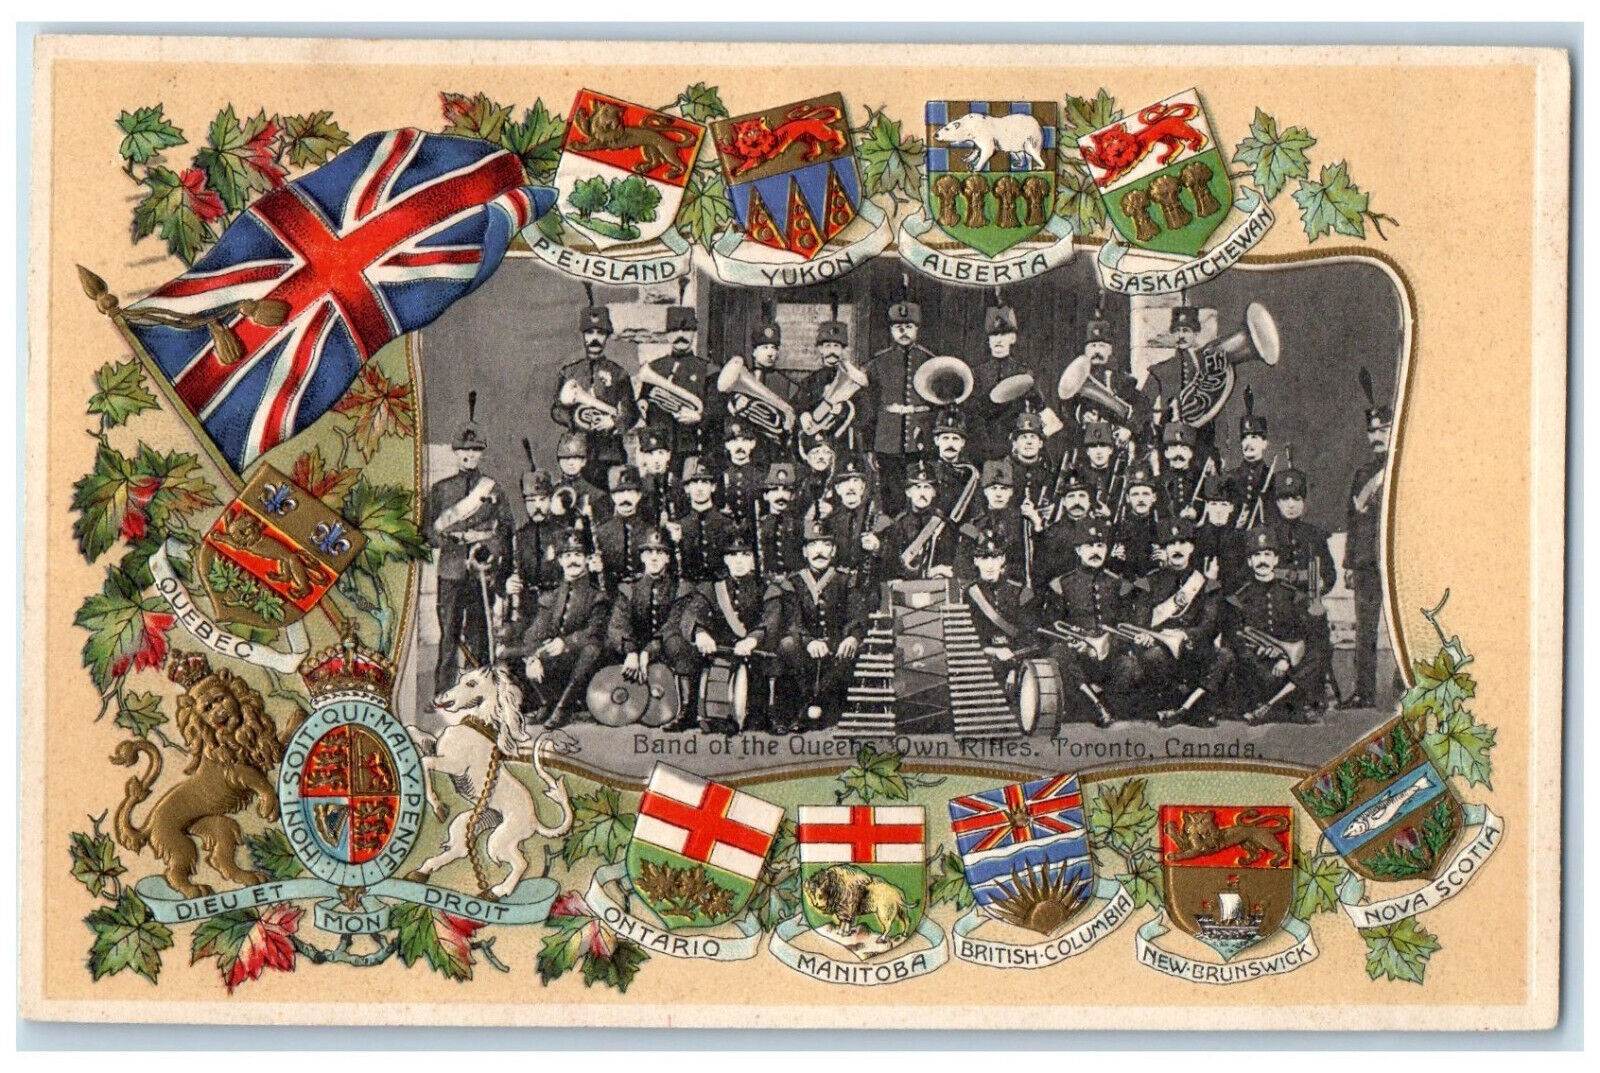 1909 Band of the Queens Own Rifles Toronto Ontario Canada Regions Logo Postcard